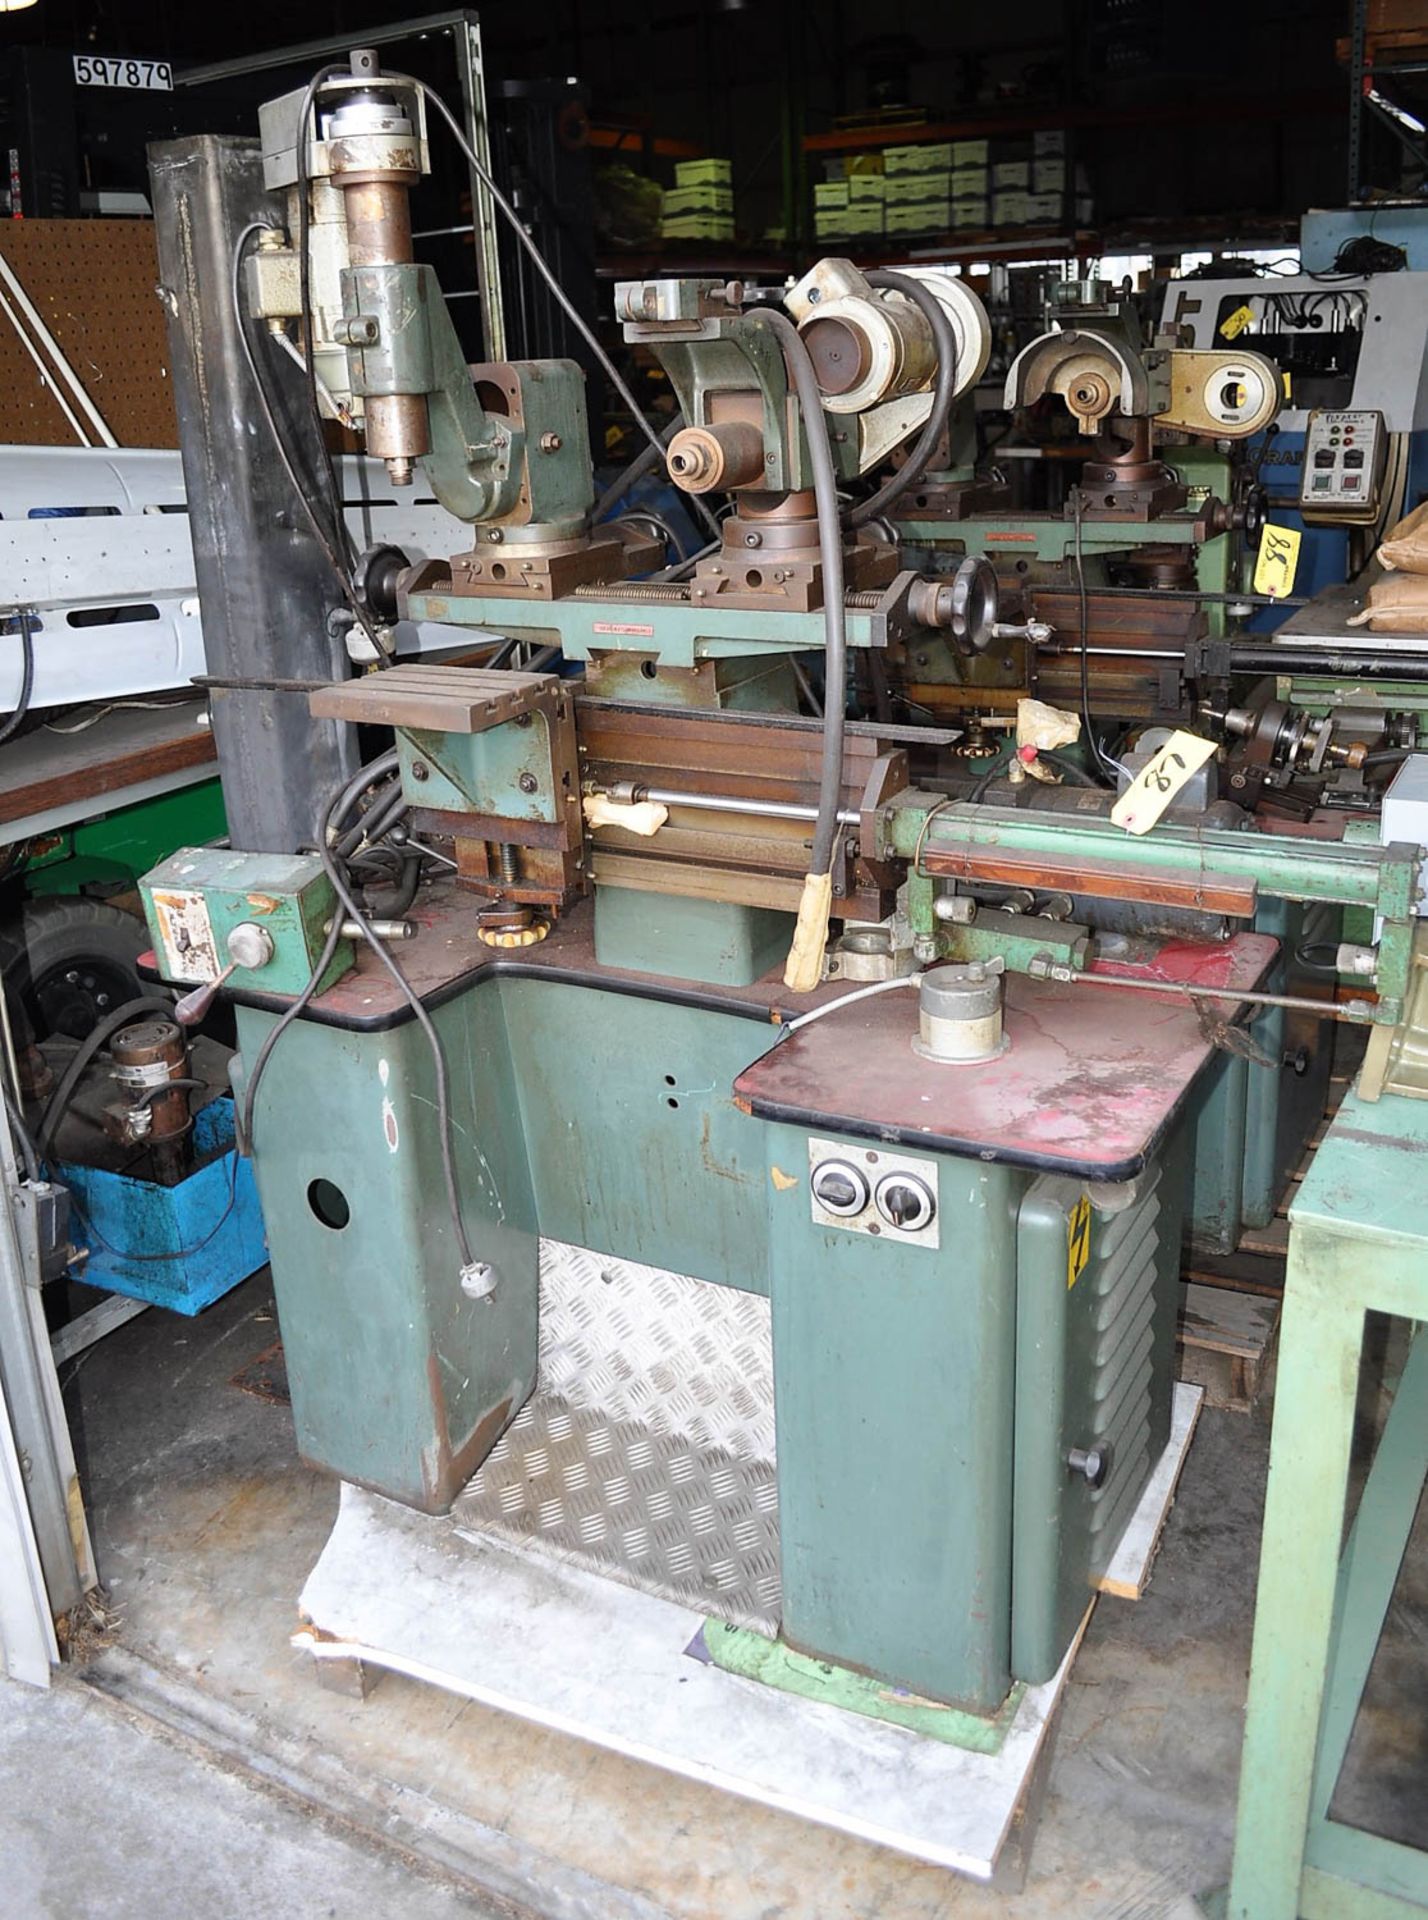 TOUSDIAMONTS MDL. T-25 DIAMOND FACETING FLY CUTTER MACHINE, S/N: 172-252 [LOCATED IN ROANOKE, VA]